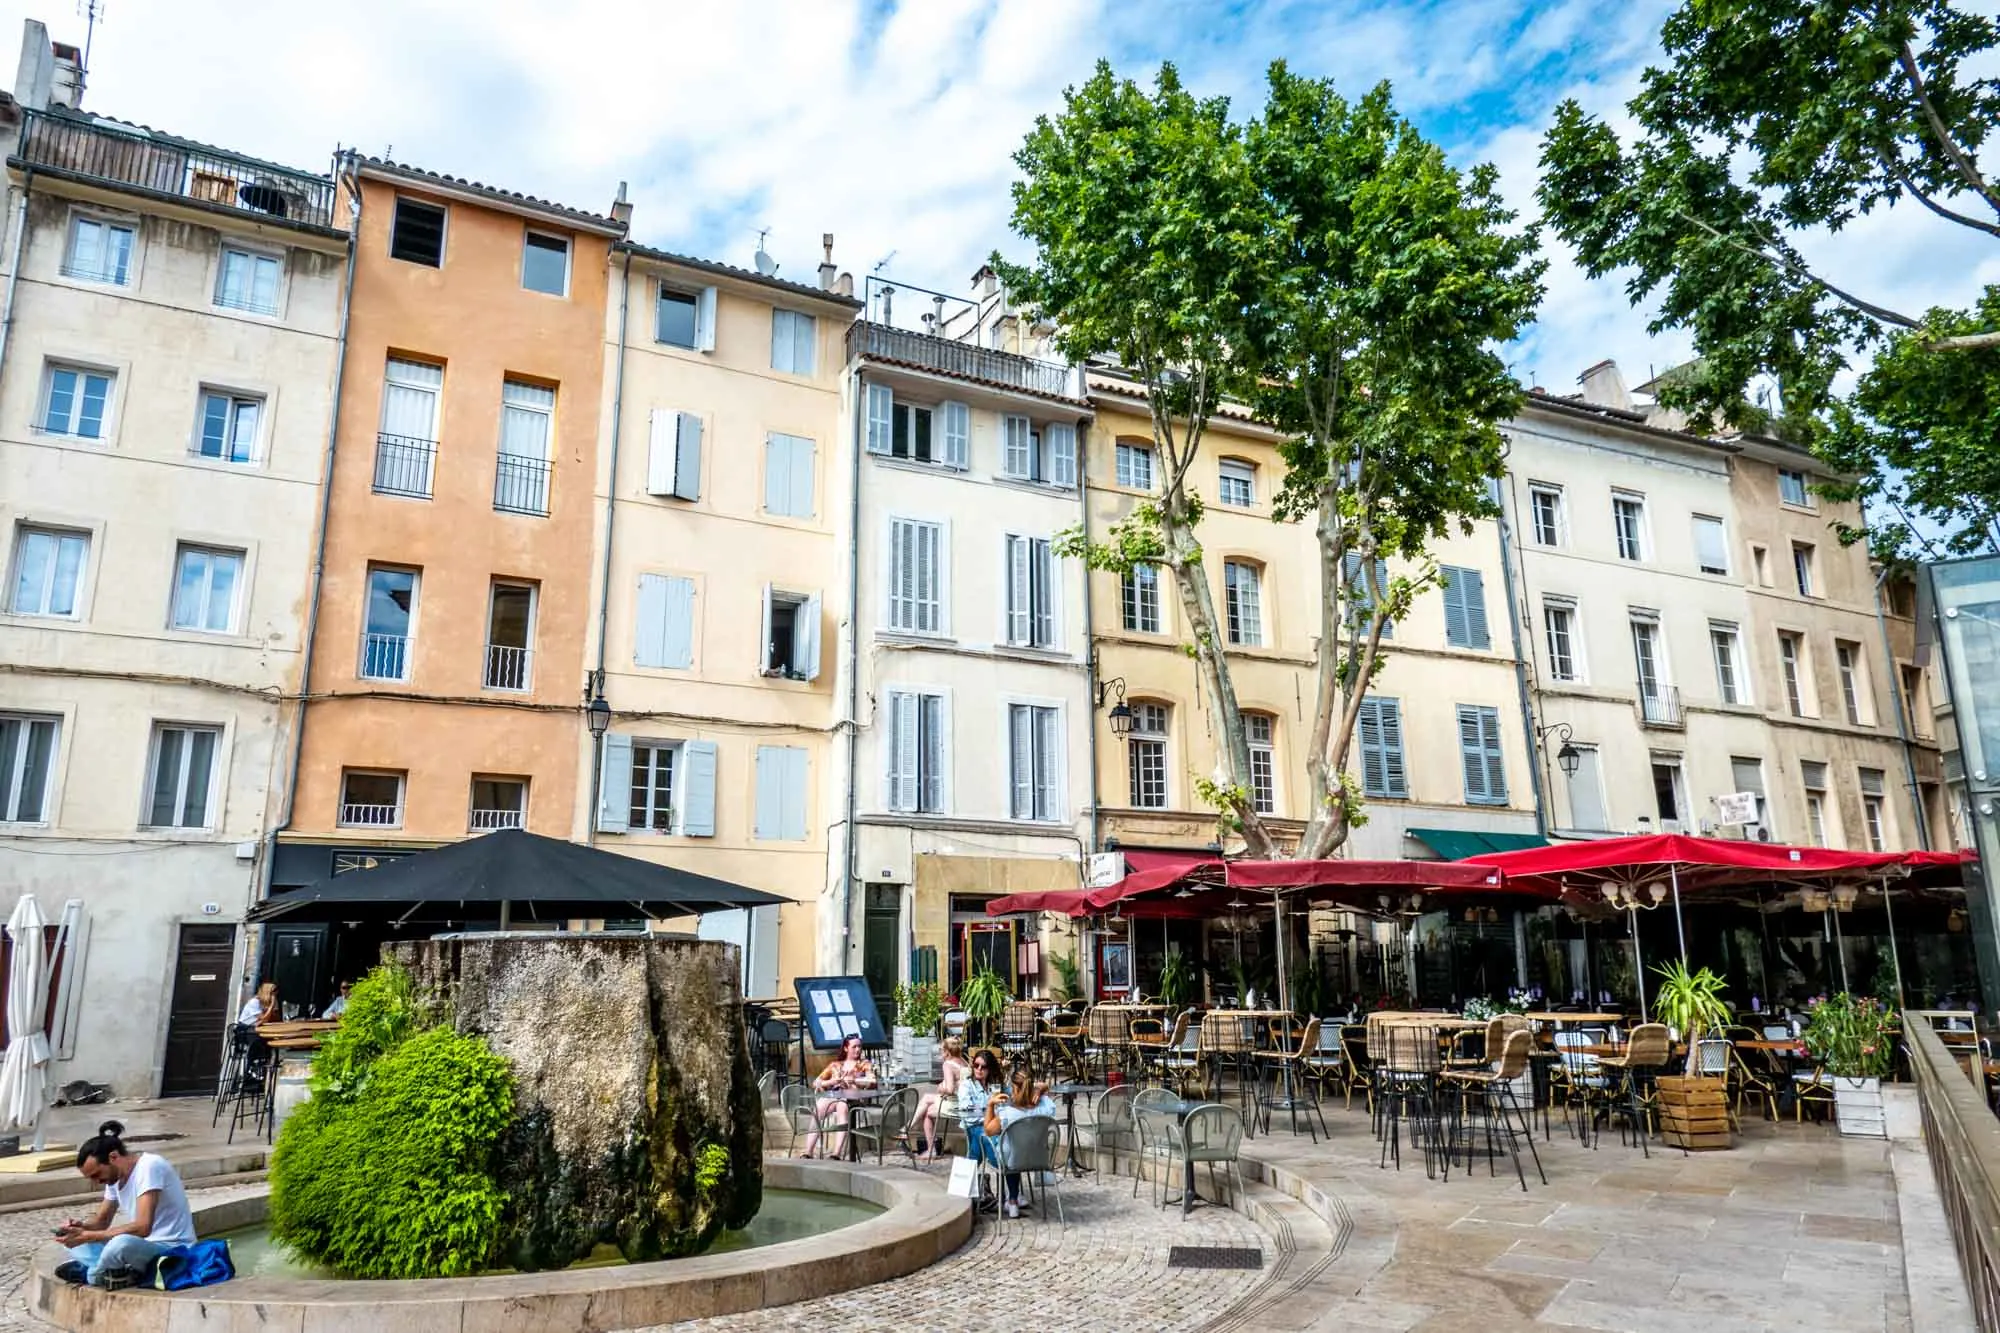 Restaurant seating and a fountain in a city square in Aix-en-Provence